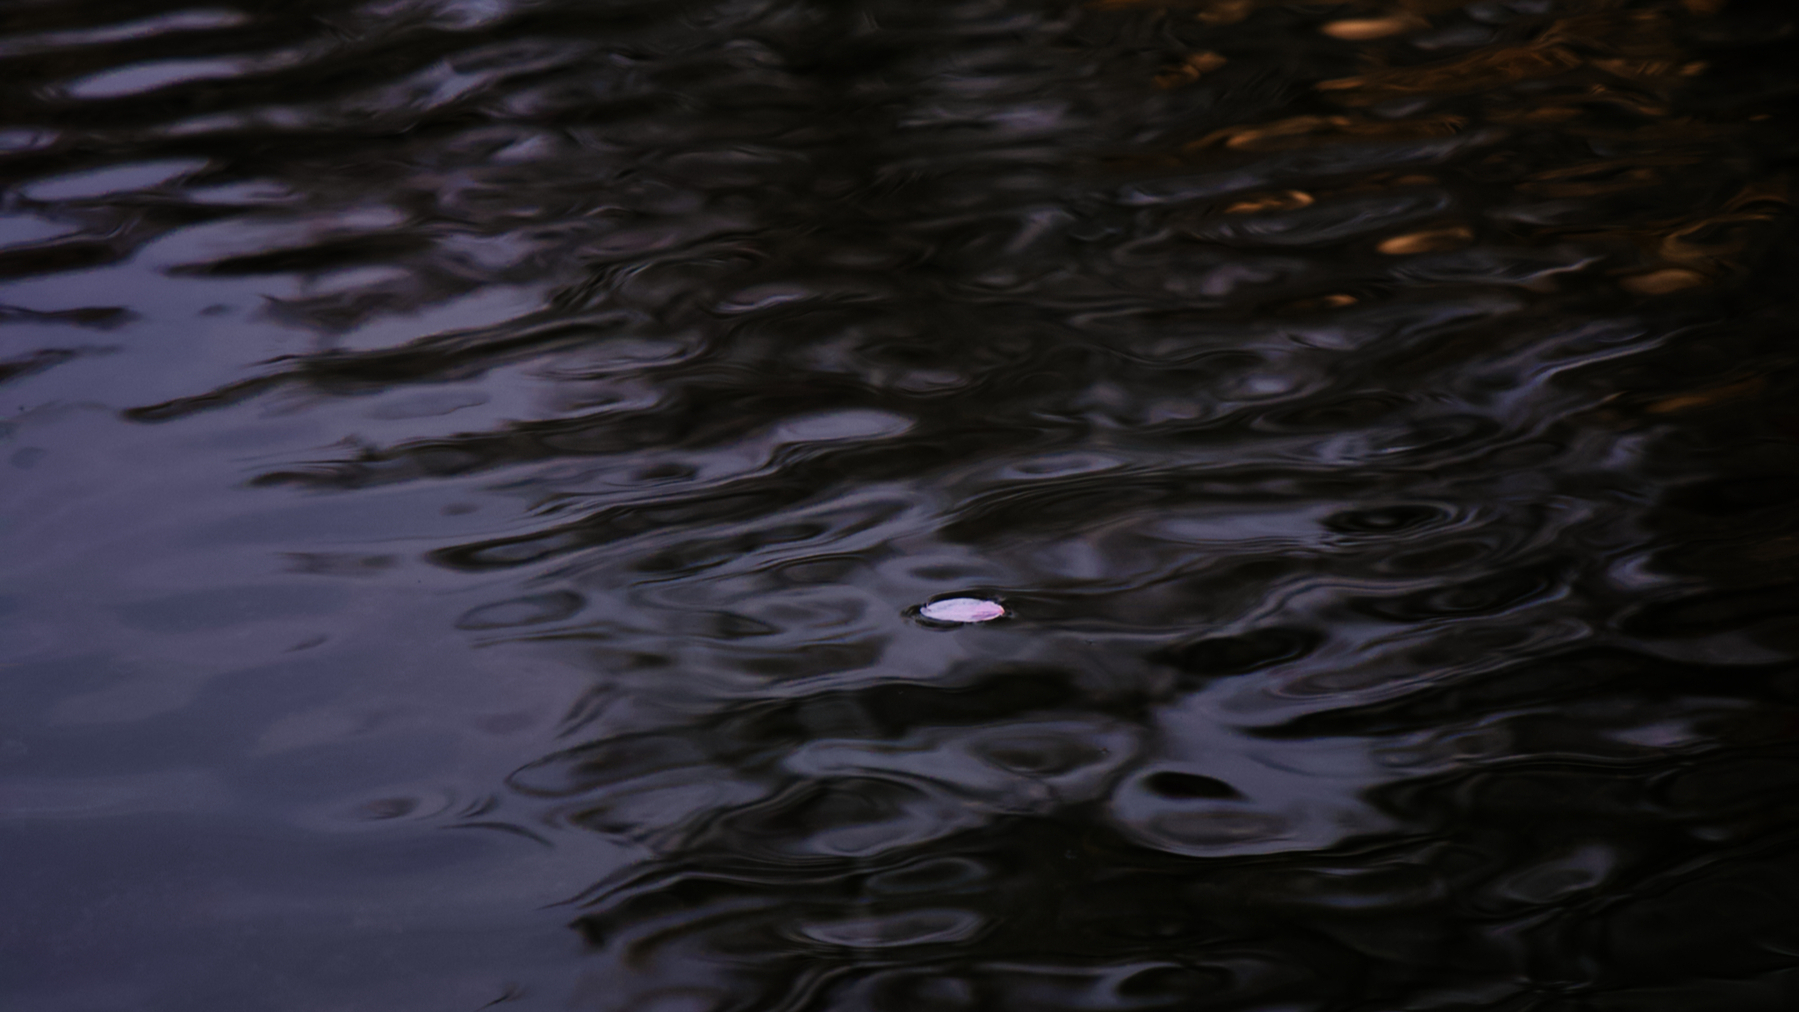 Close up photo a of a single cherry blossom petal in a pond rippled with a gentle wind